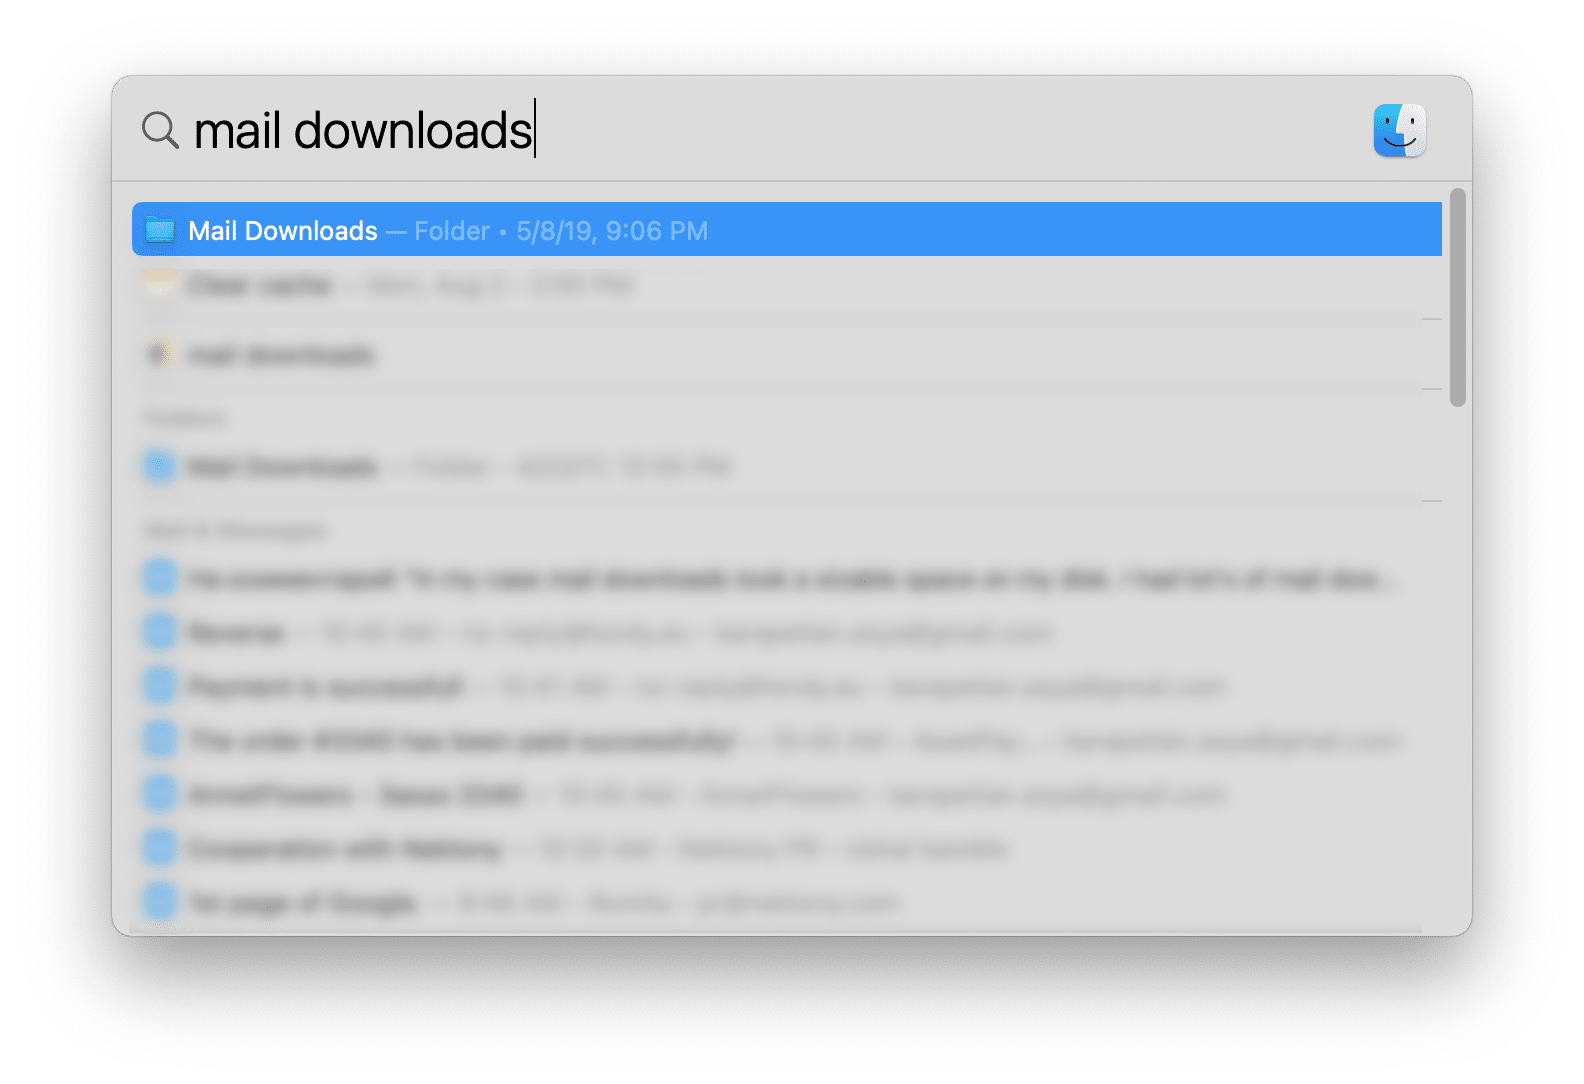 Spotlight search showing the Mail Downloads folder